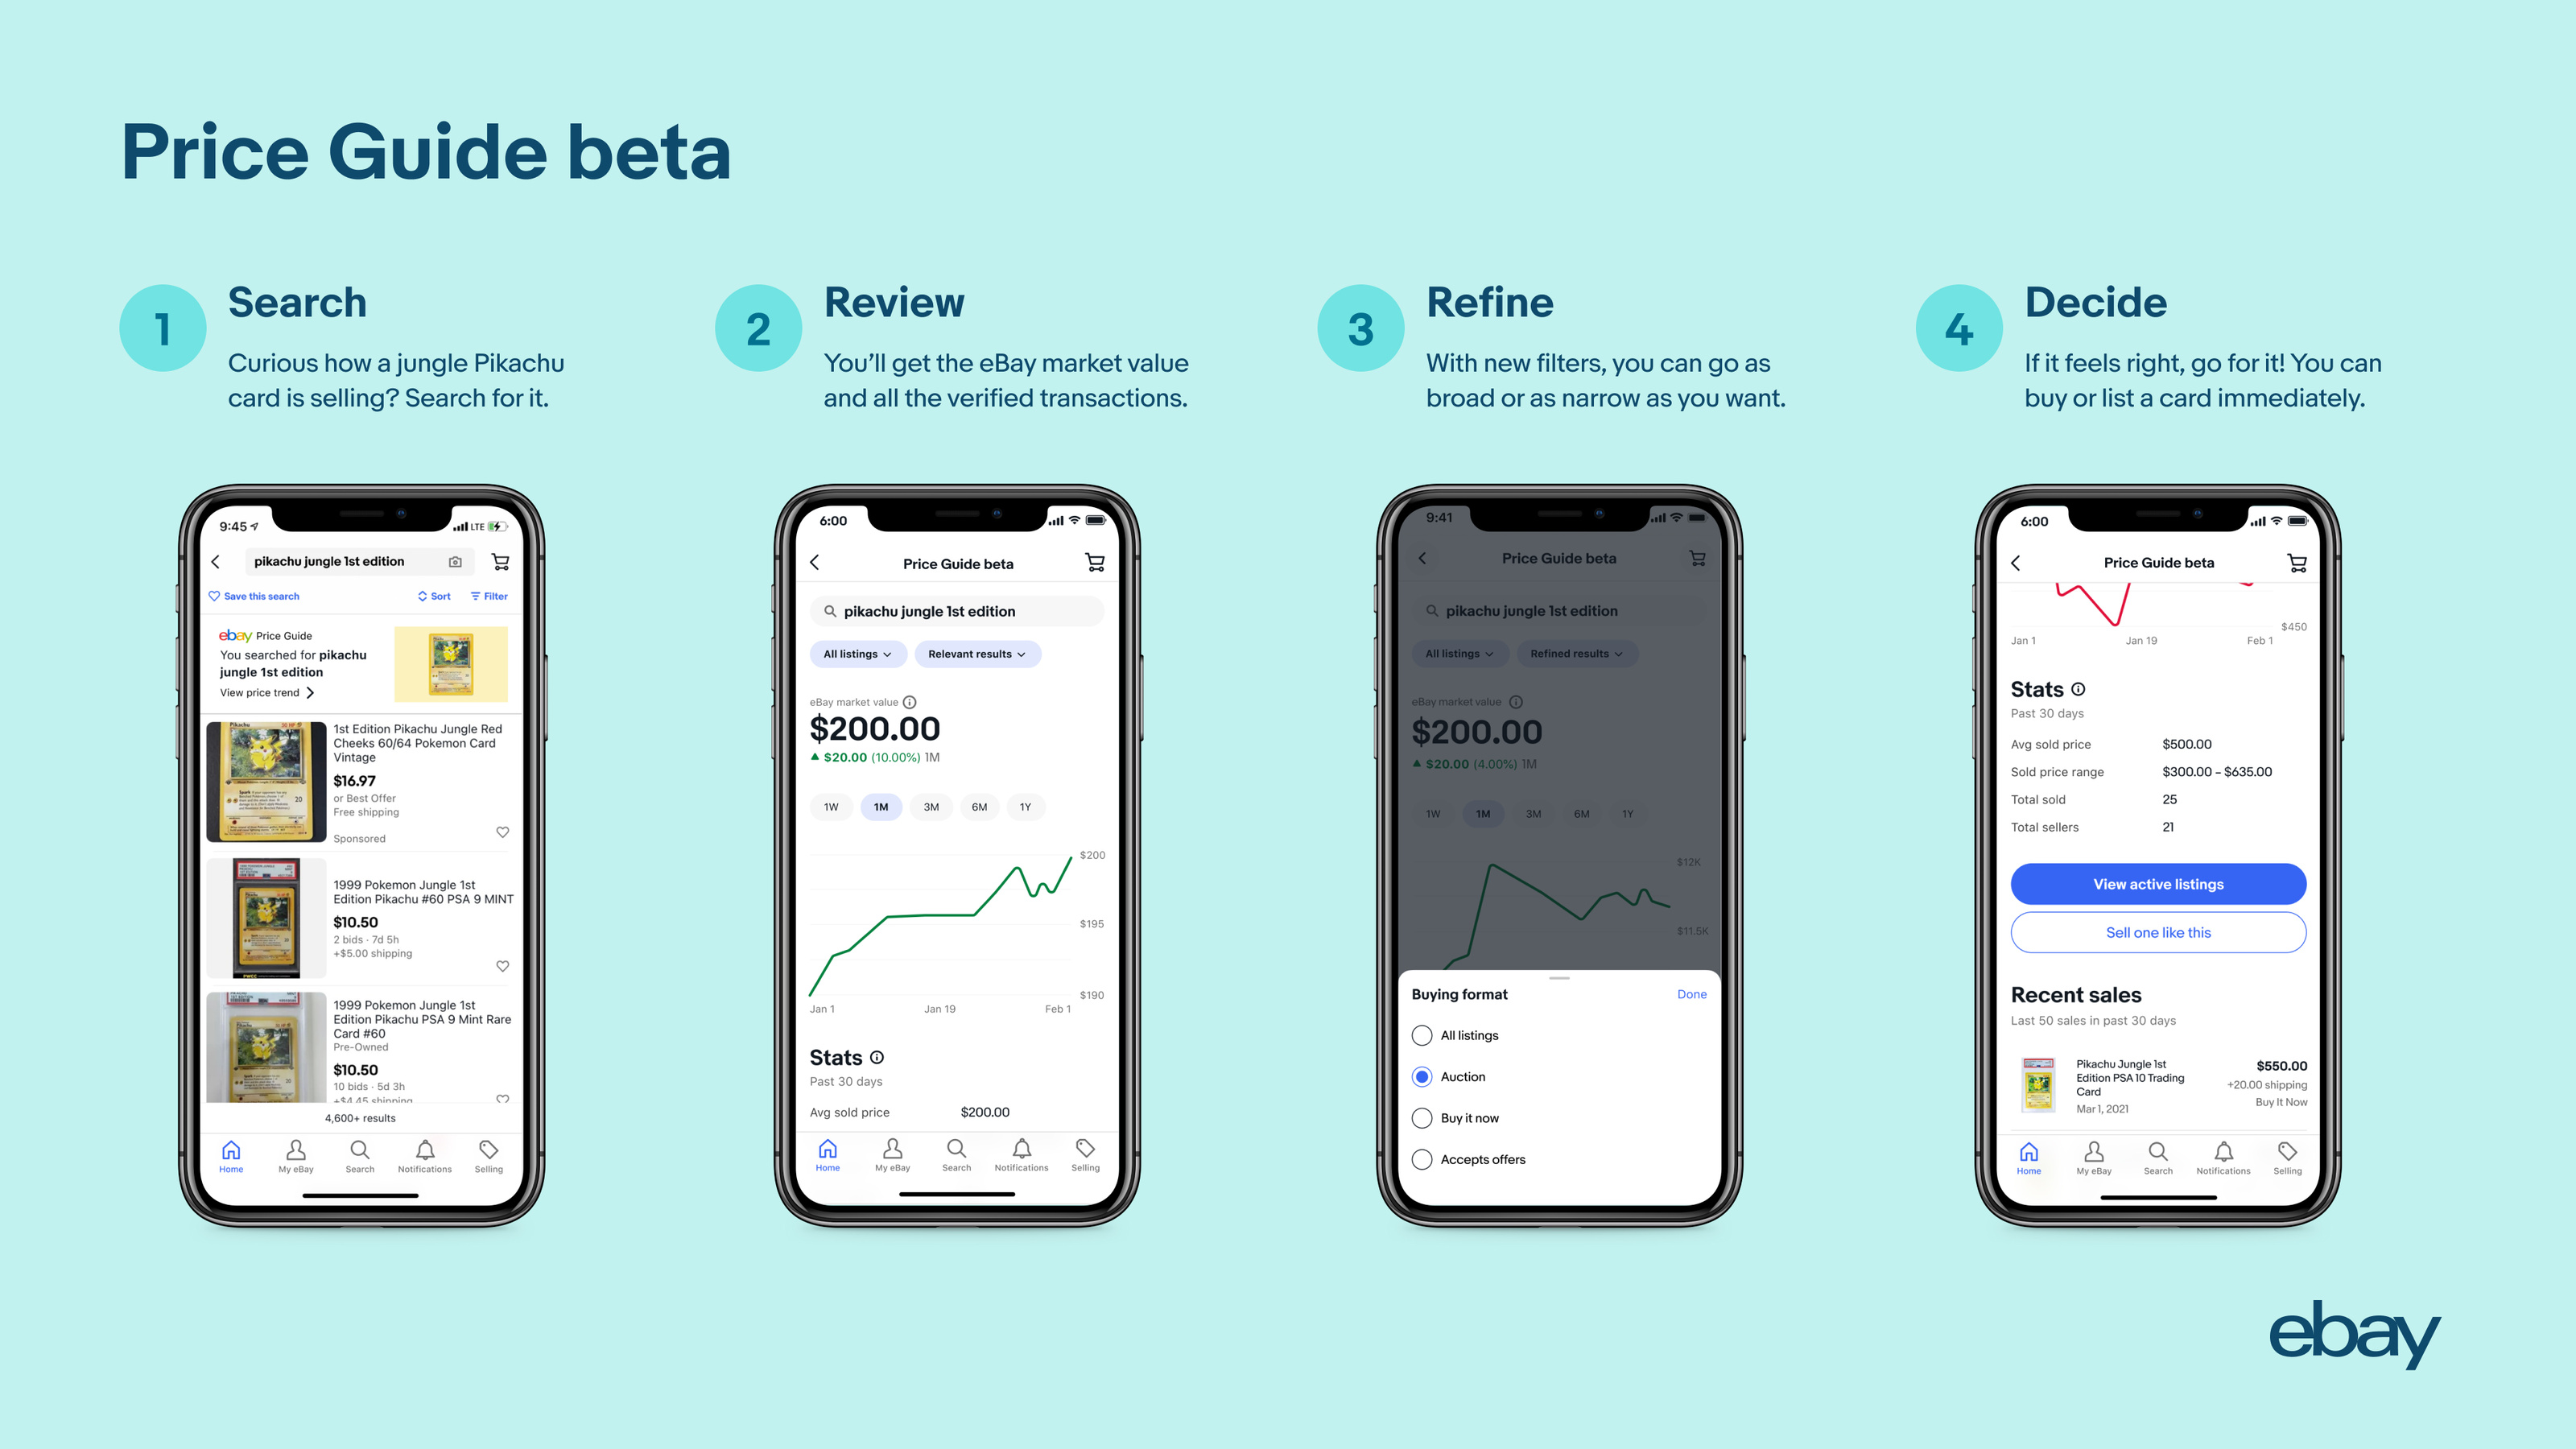 Price Guide beta: Search, Review, Refine, Decide. Curious how a jungle Pikachu card is selling? Search for it. You’ll get the eBay market value and all the verified transactions. With new filters, you can go as broad or as narrow as you want. If it feels right, go for it! You can buy or list a card immediately.